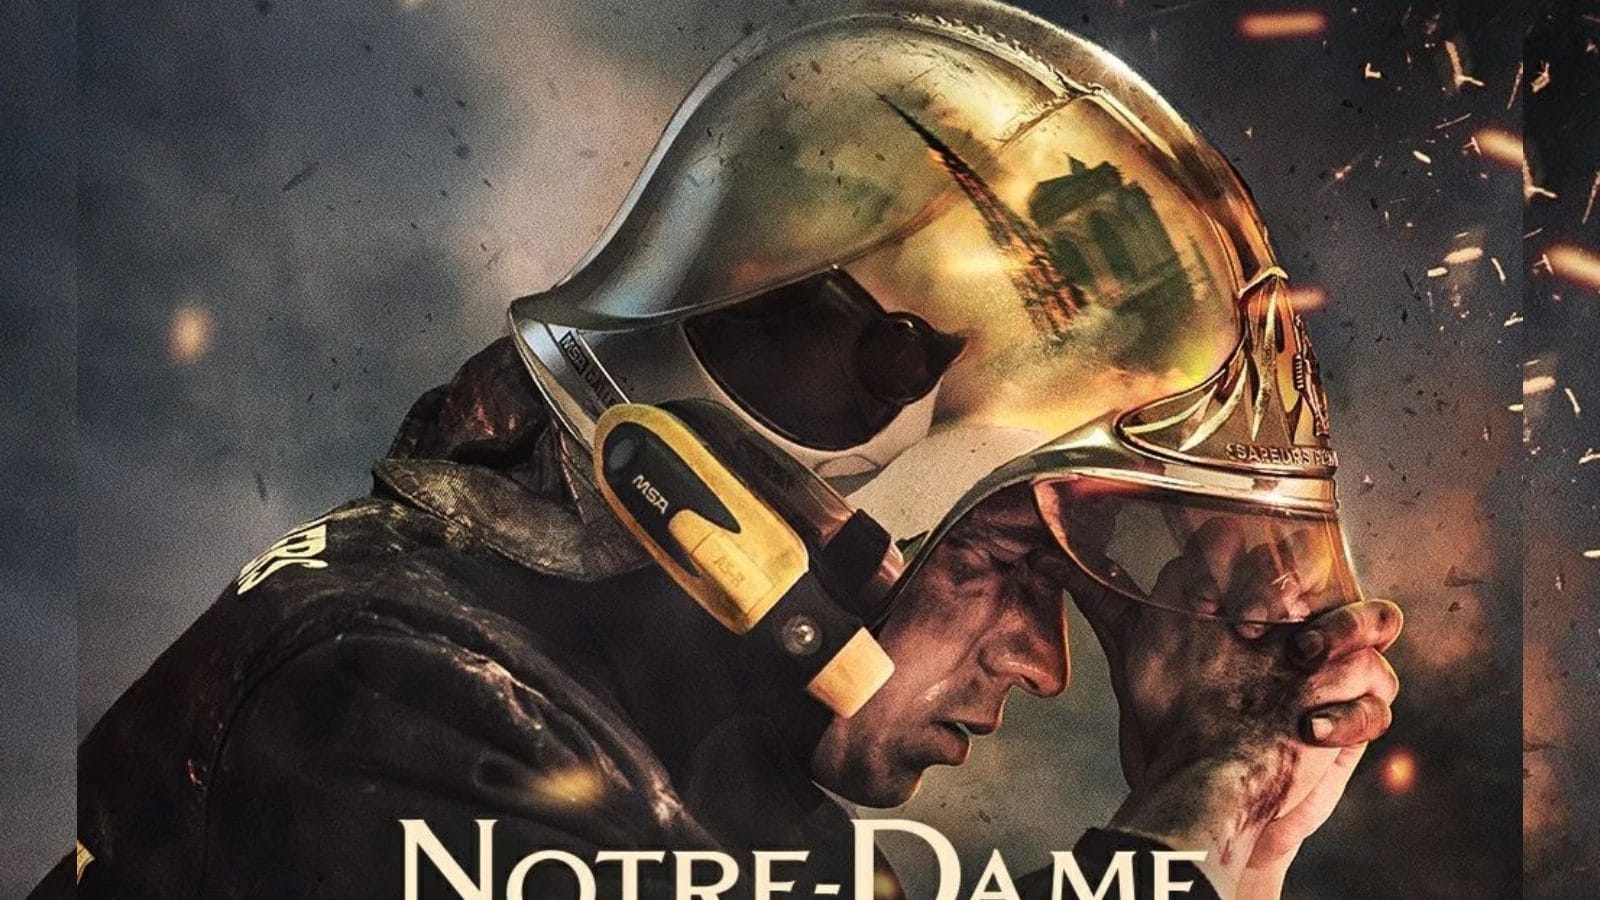 Ambassador of France to India Holds Special Screening of French Film 'Notre-Dame On Fire' in Delhi